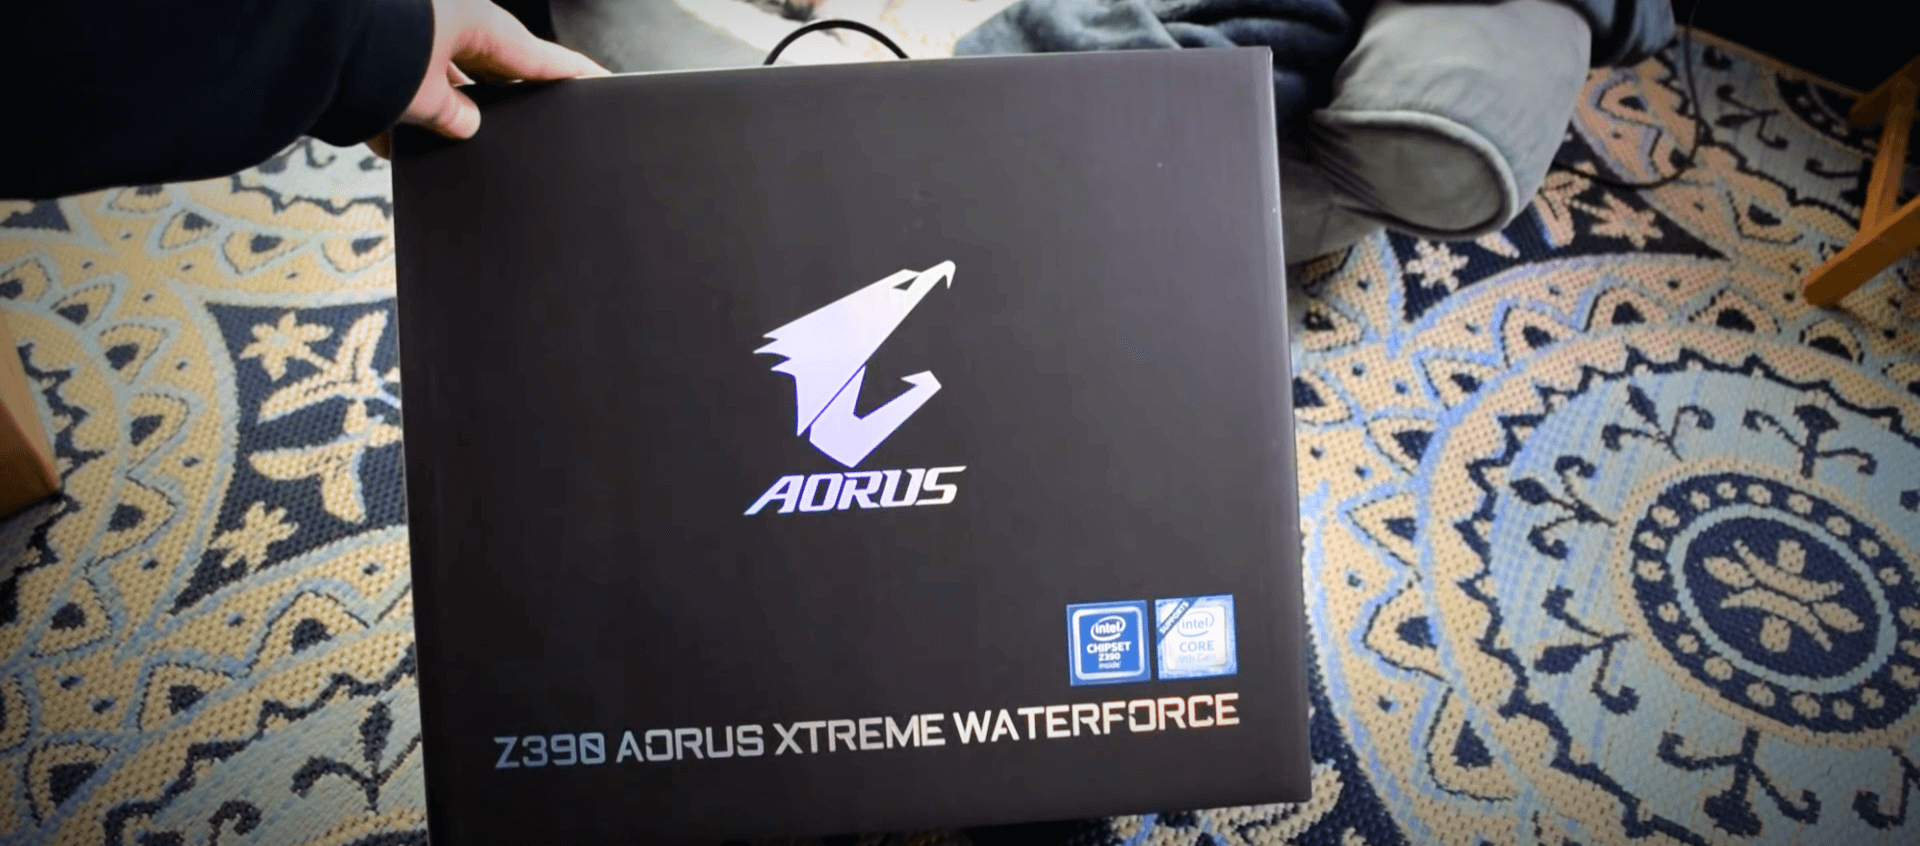 Z390 AORUS Xtreme Waterforce Unboxing